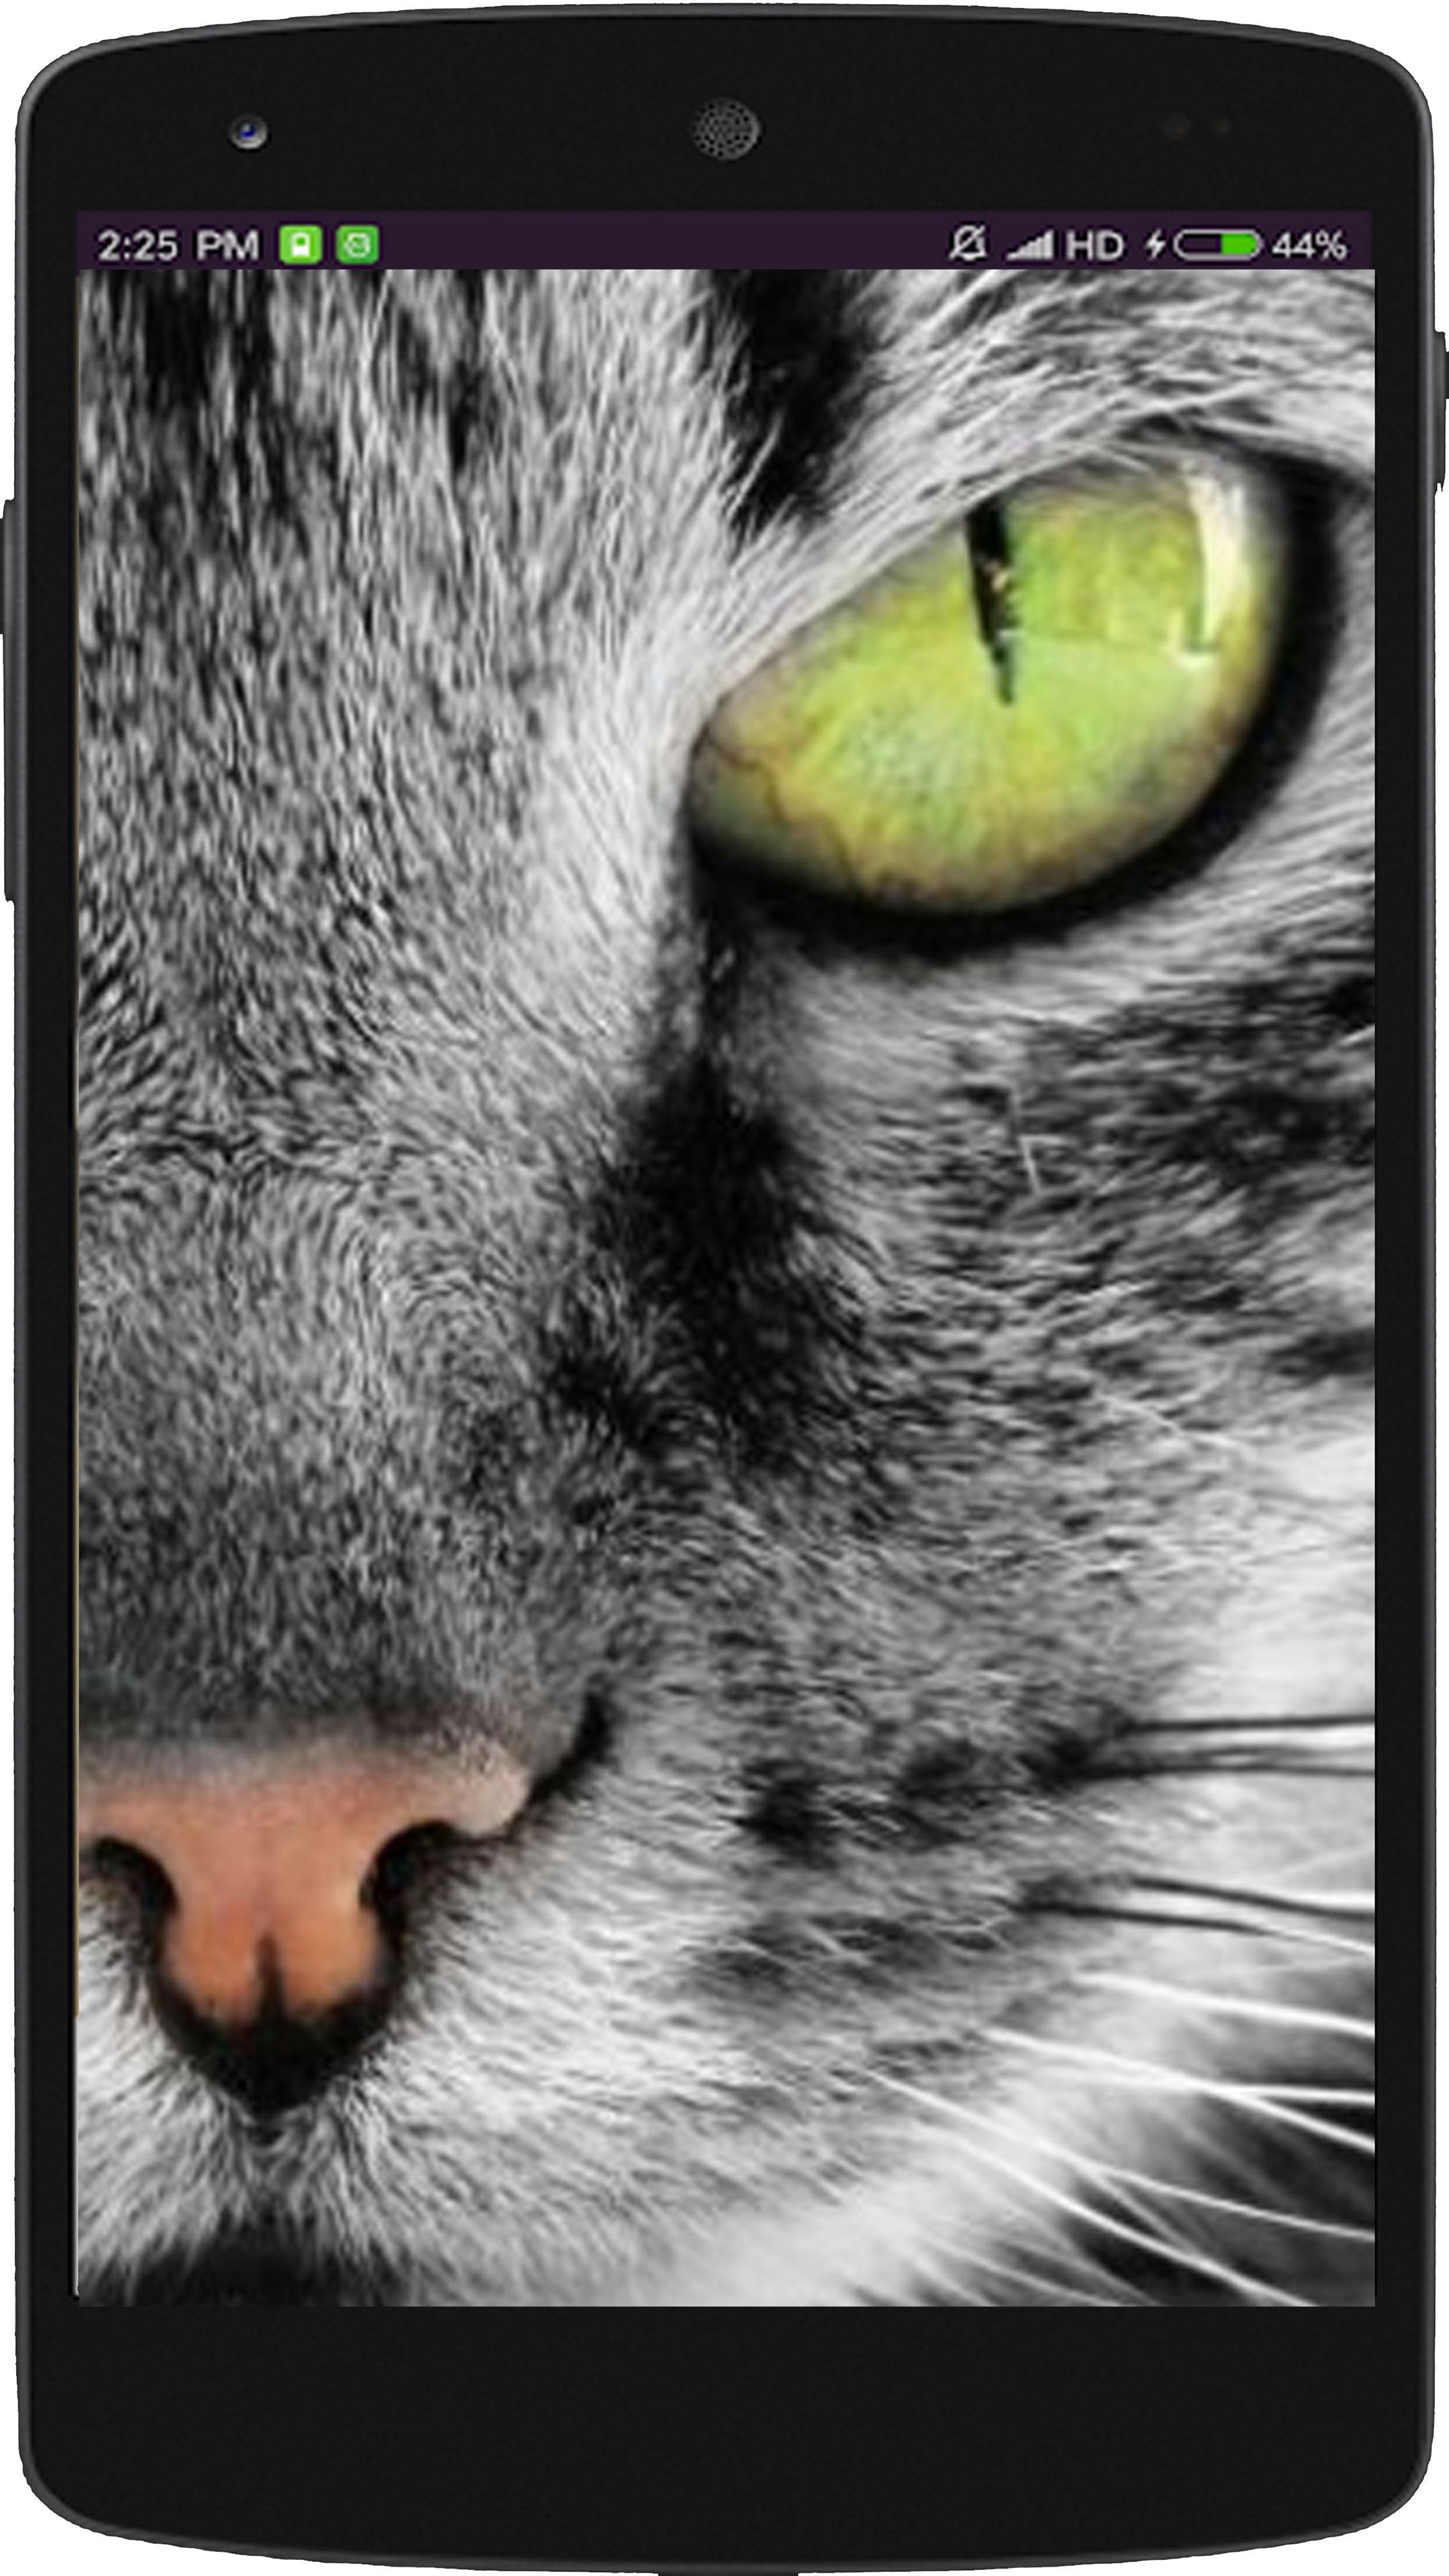 Wallpaper Kucing Lucu For Android APK Download